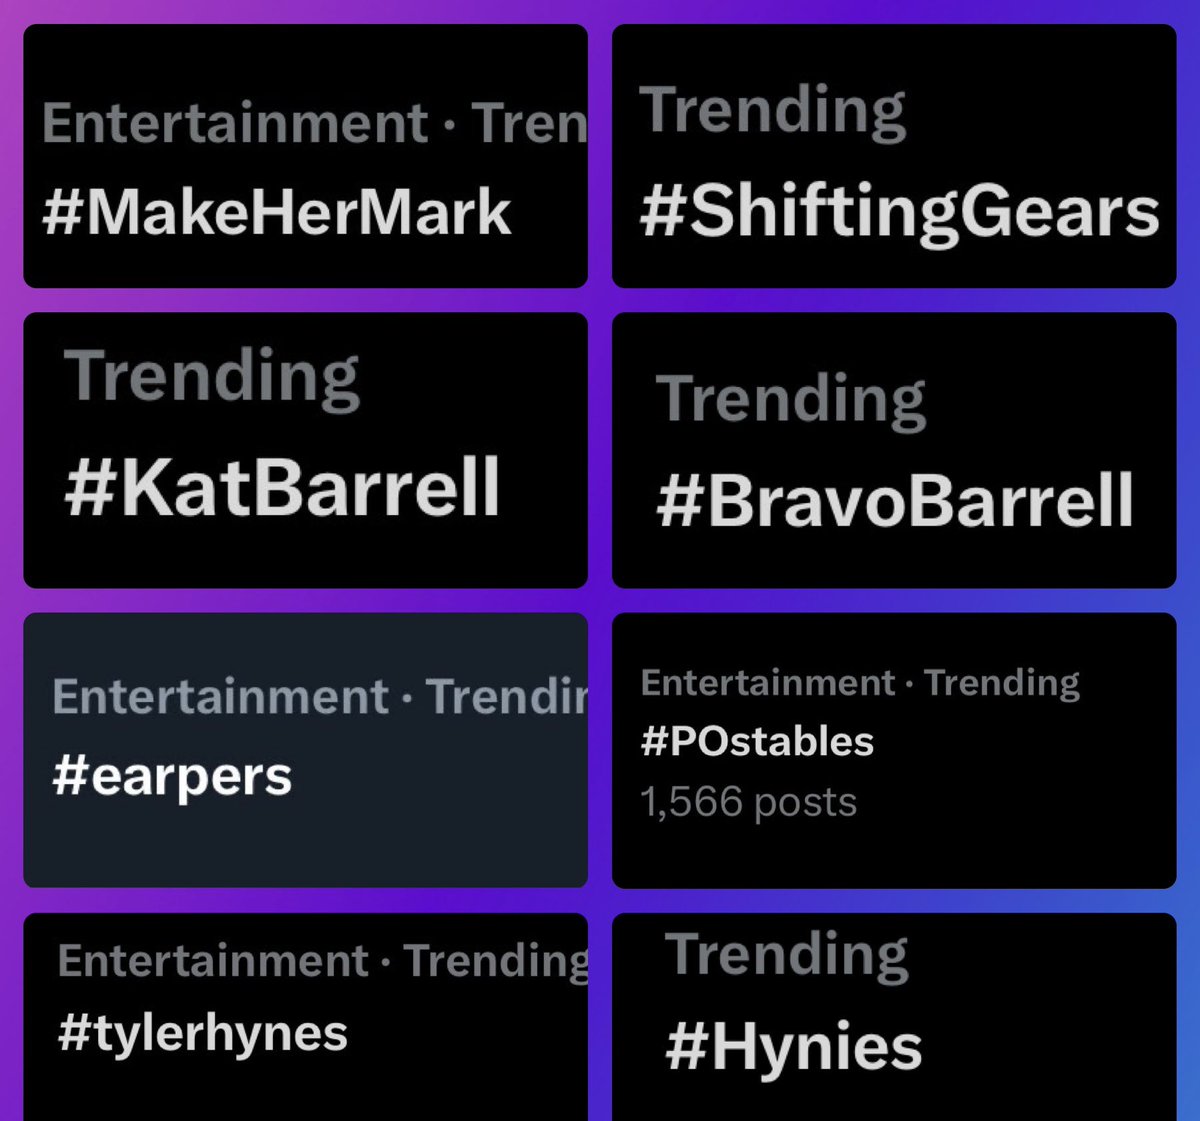 Everything trending tonight building for for #ShiftingGears @RealCrystalLowe 

Fandoms United to support our favourite people! 💜

#MakeHerMark #Hallmark #HynEarpAbles